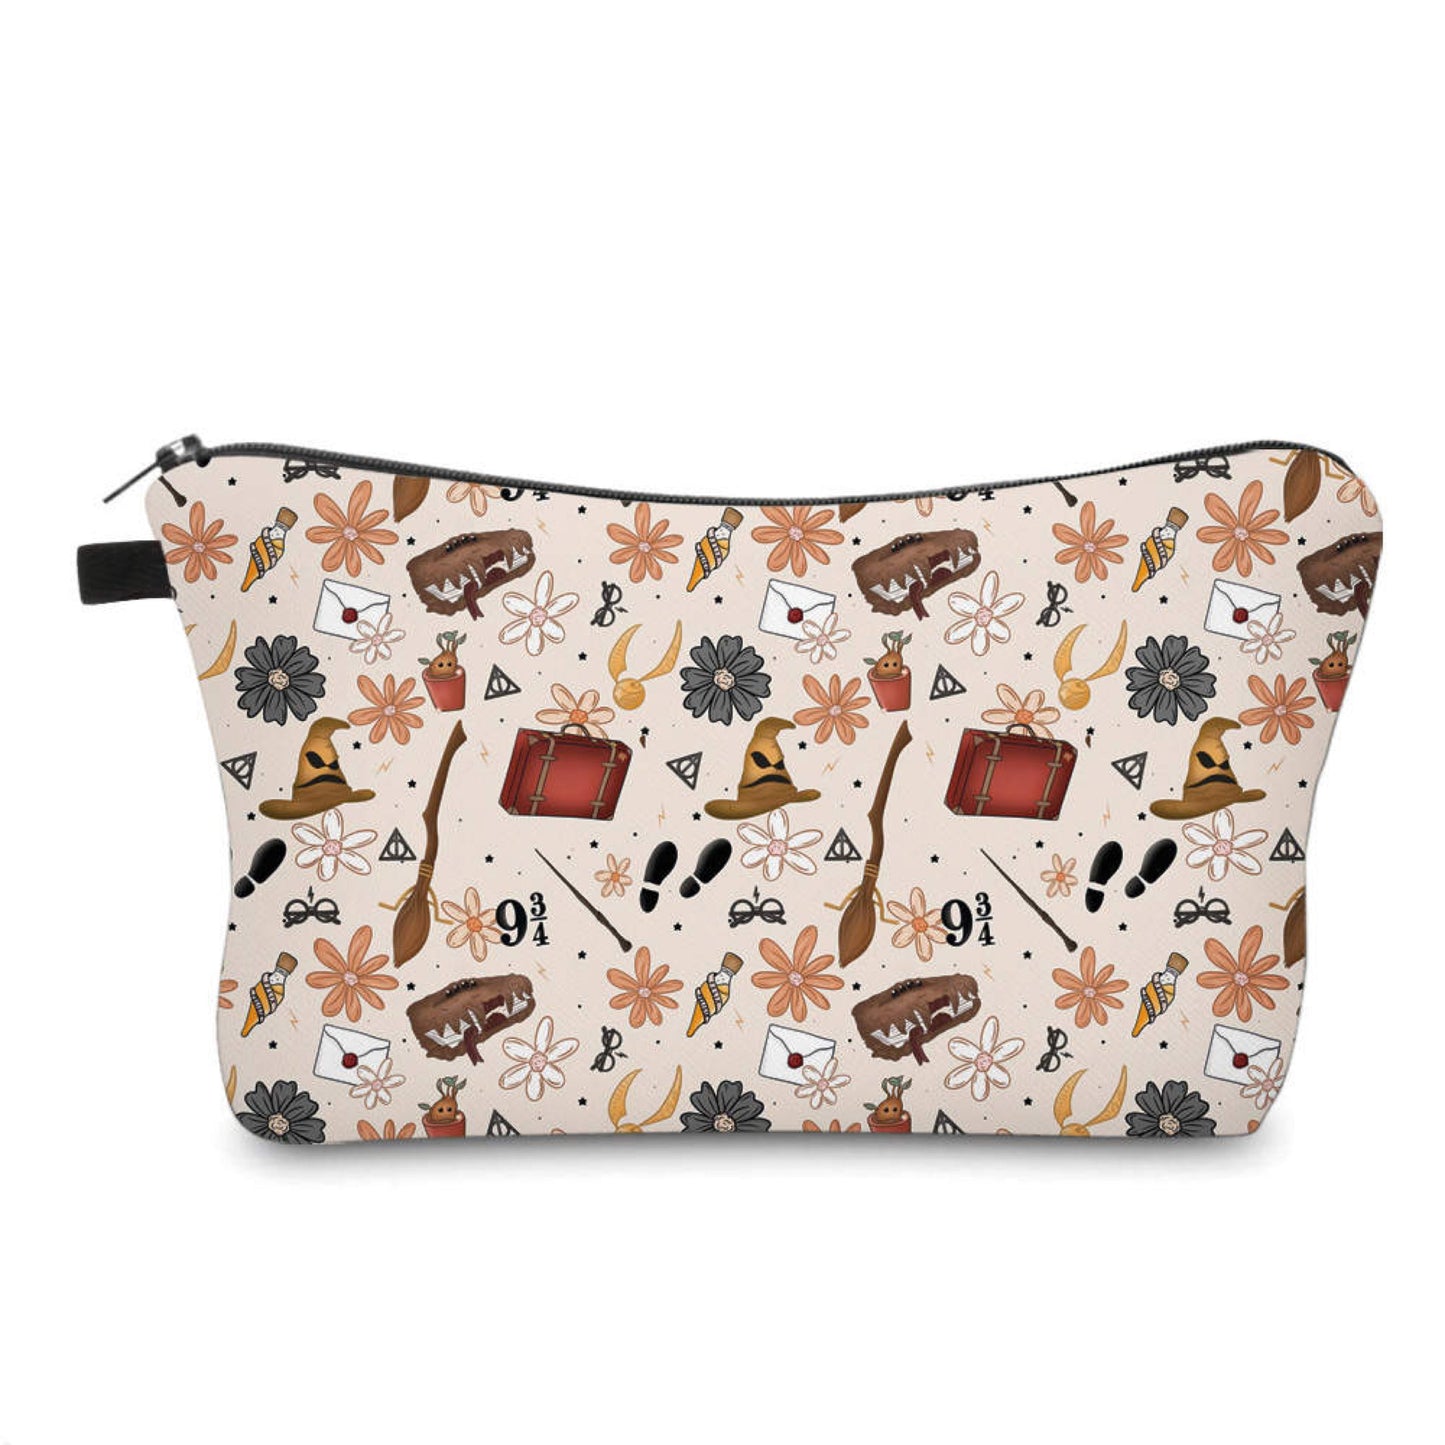 Magic Floral Suitcase - Water-Resistant Multi-Use Pouch